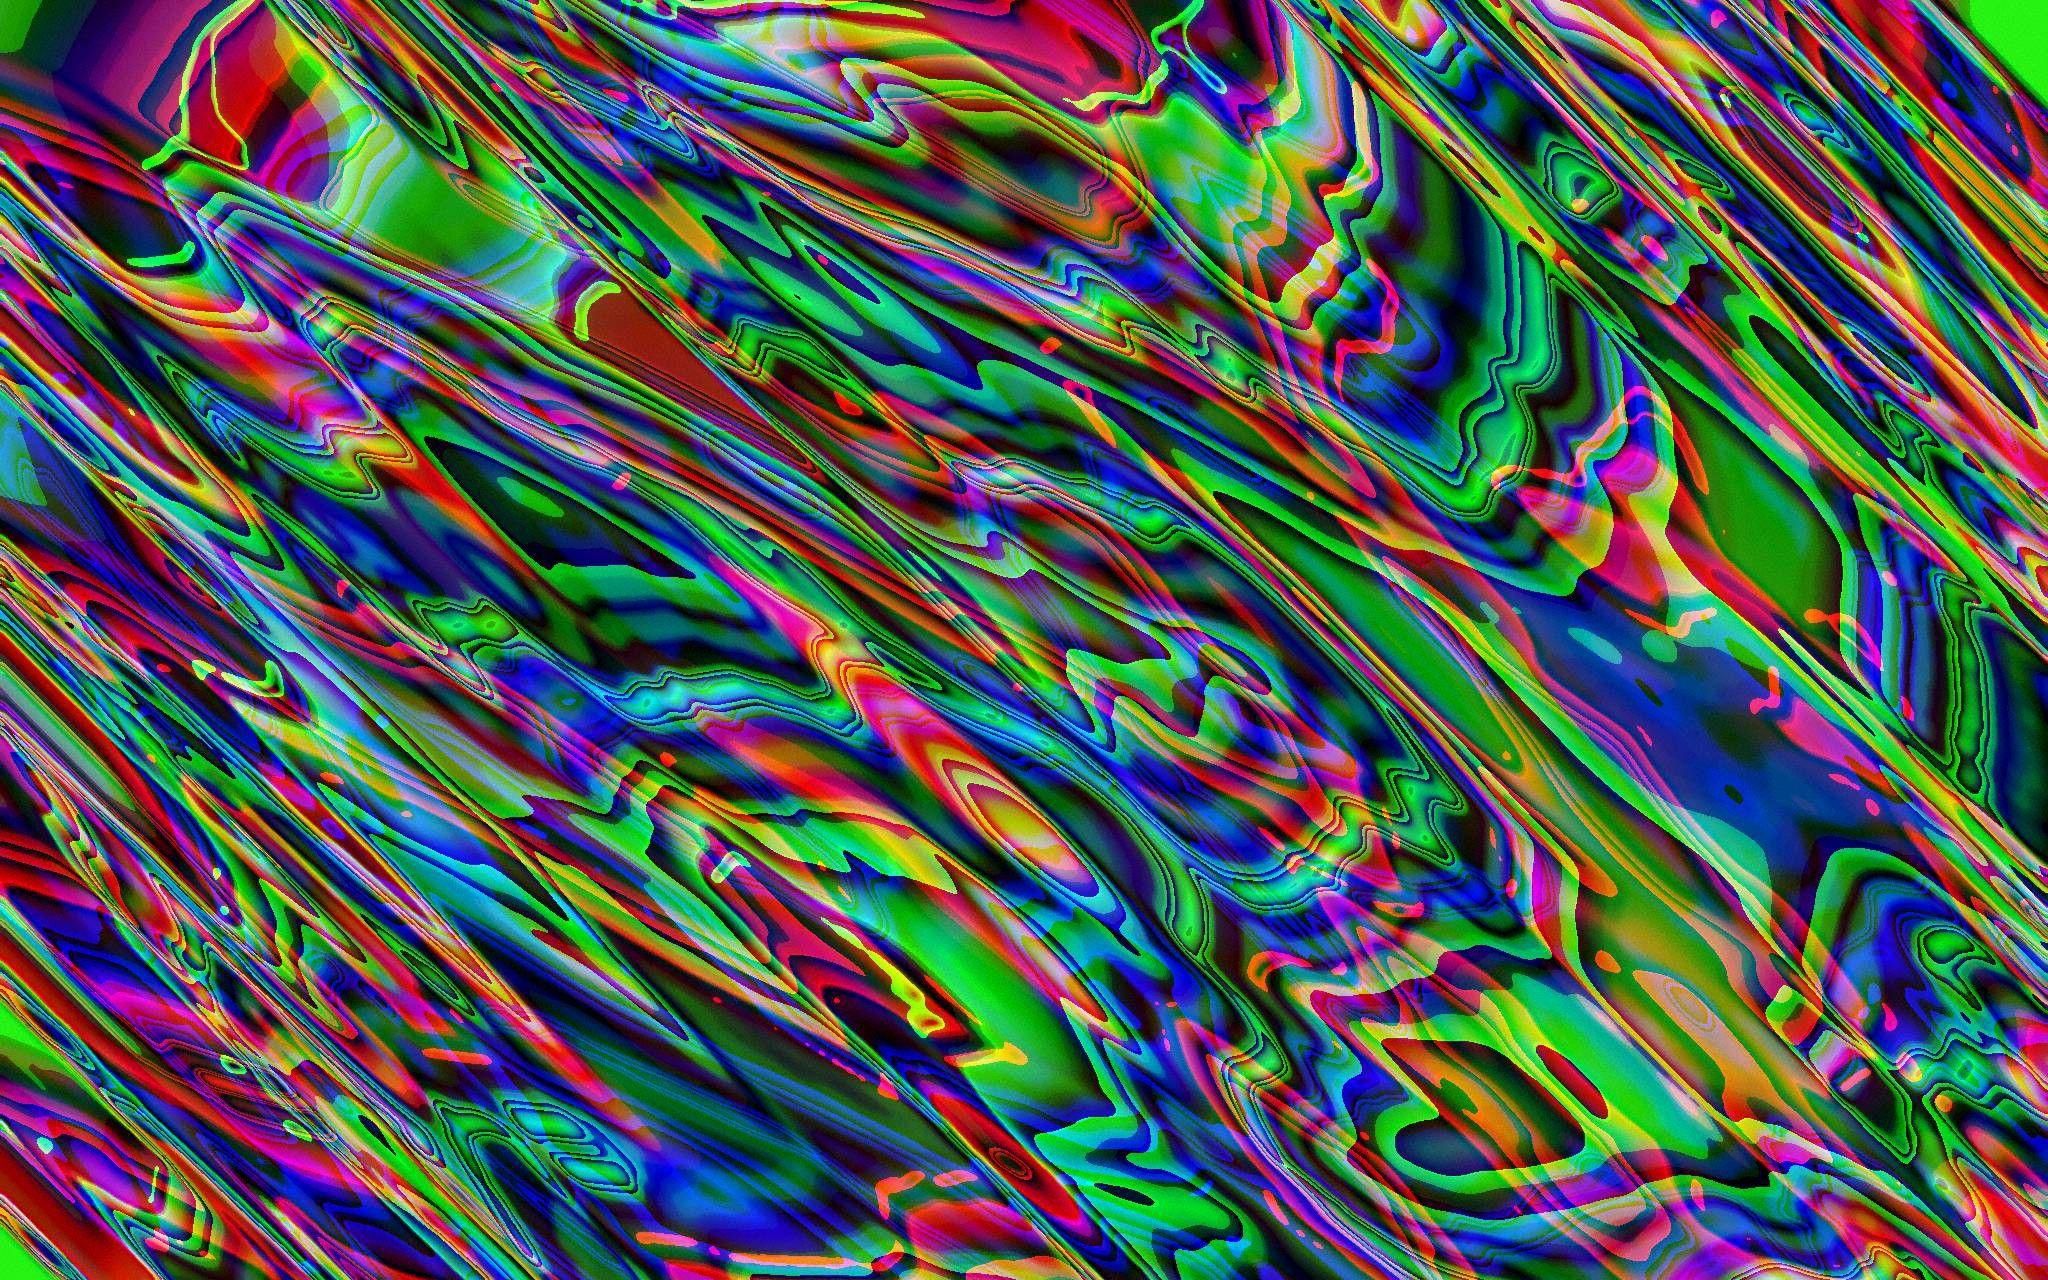 A colorful abstract image with many colors and lines - Trippy